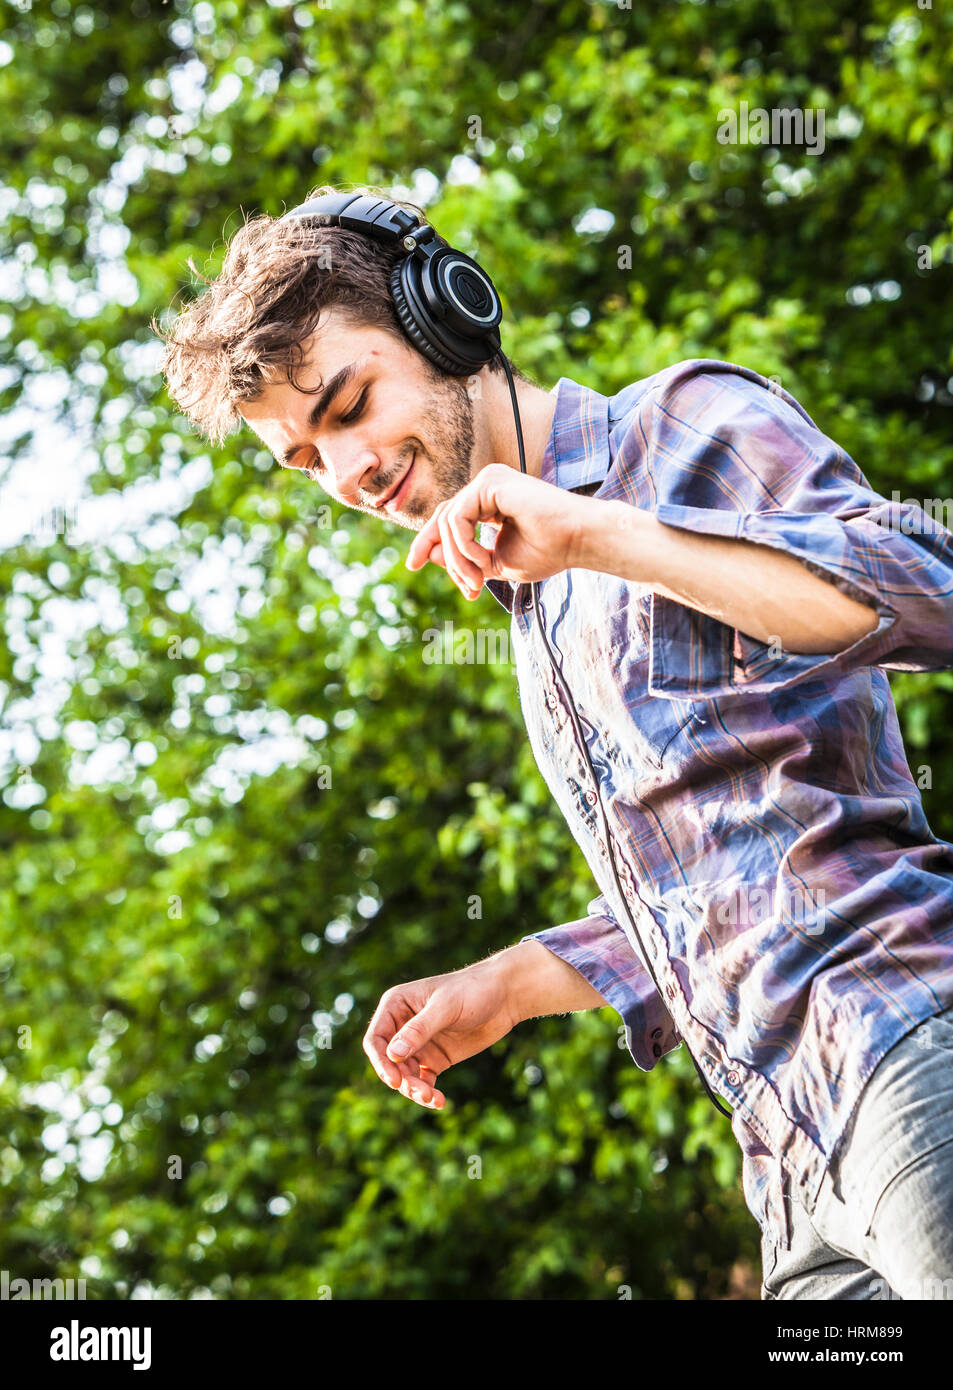 A young man listening to music on headphones and dancing. Stock Photo